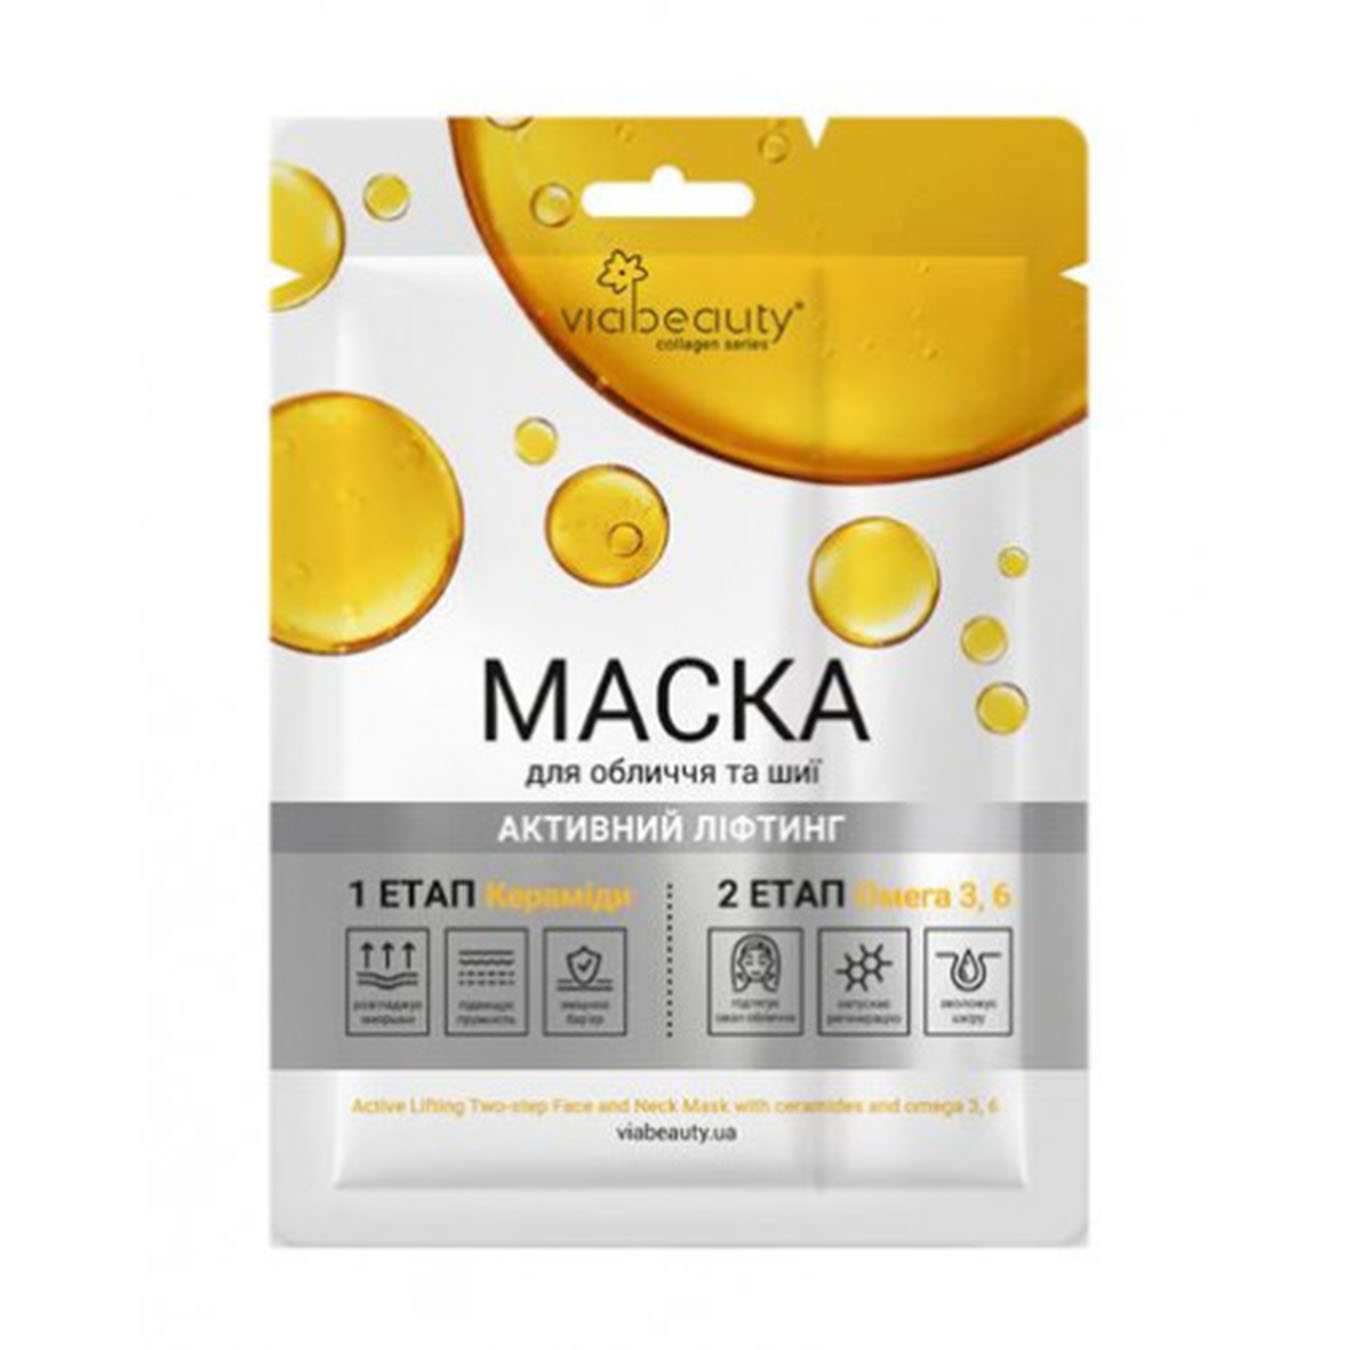 VIABEAUTY lifting face mask for the neck with ceramides and Omega 3, 6 ﻿﻿